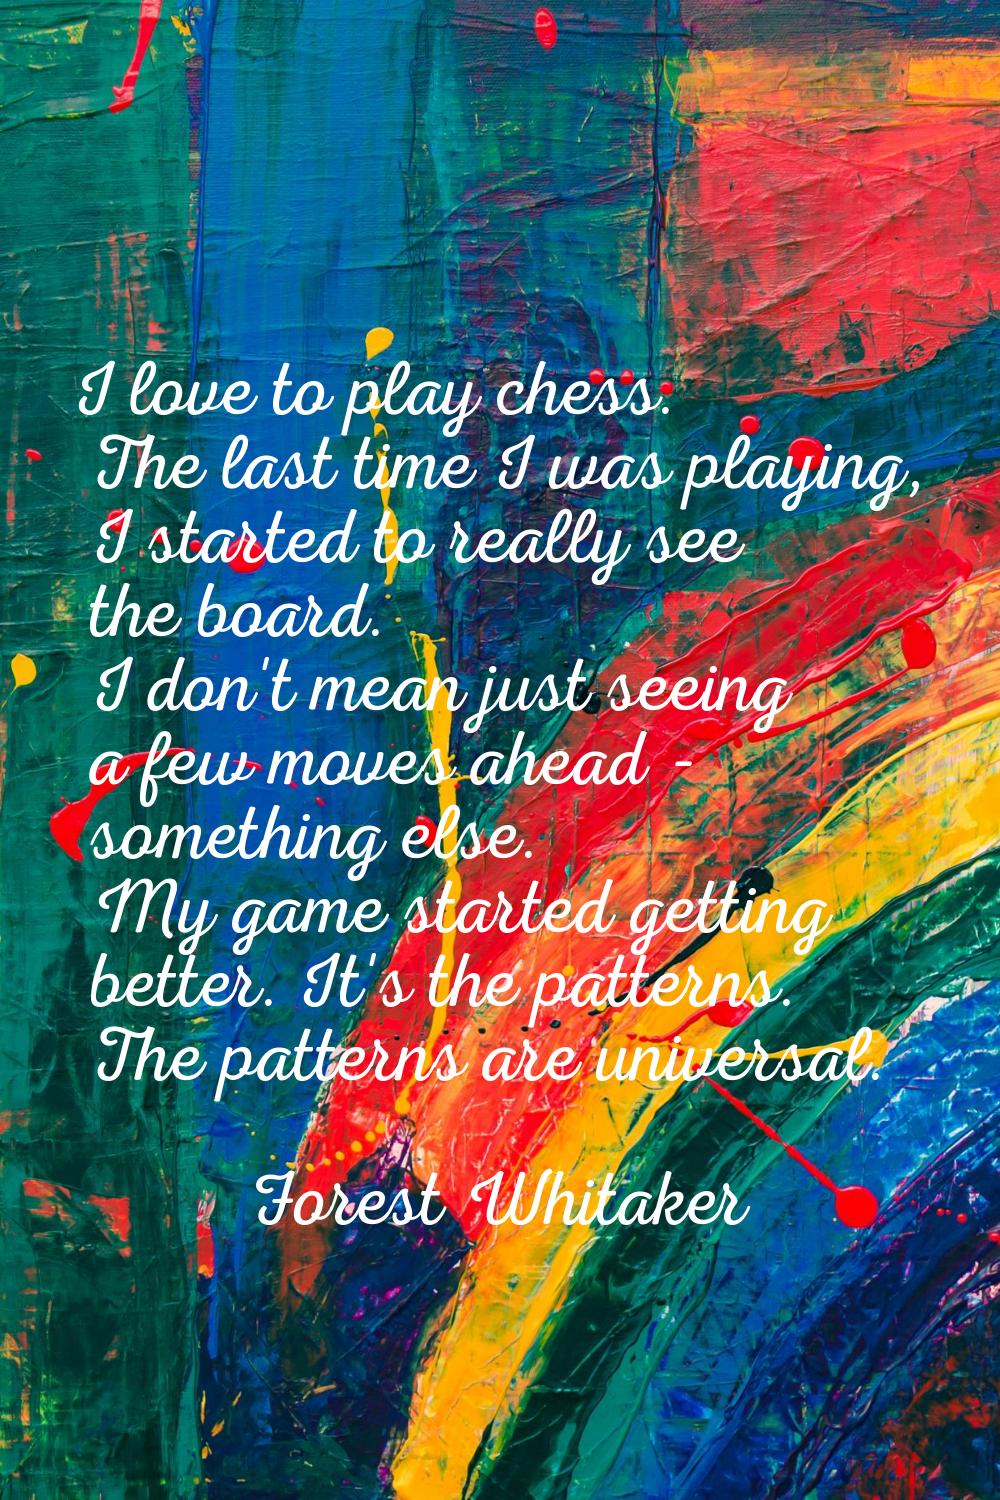 I love to play chess. The last time I was playing, I started to really see the board. I don't mean 